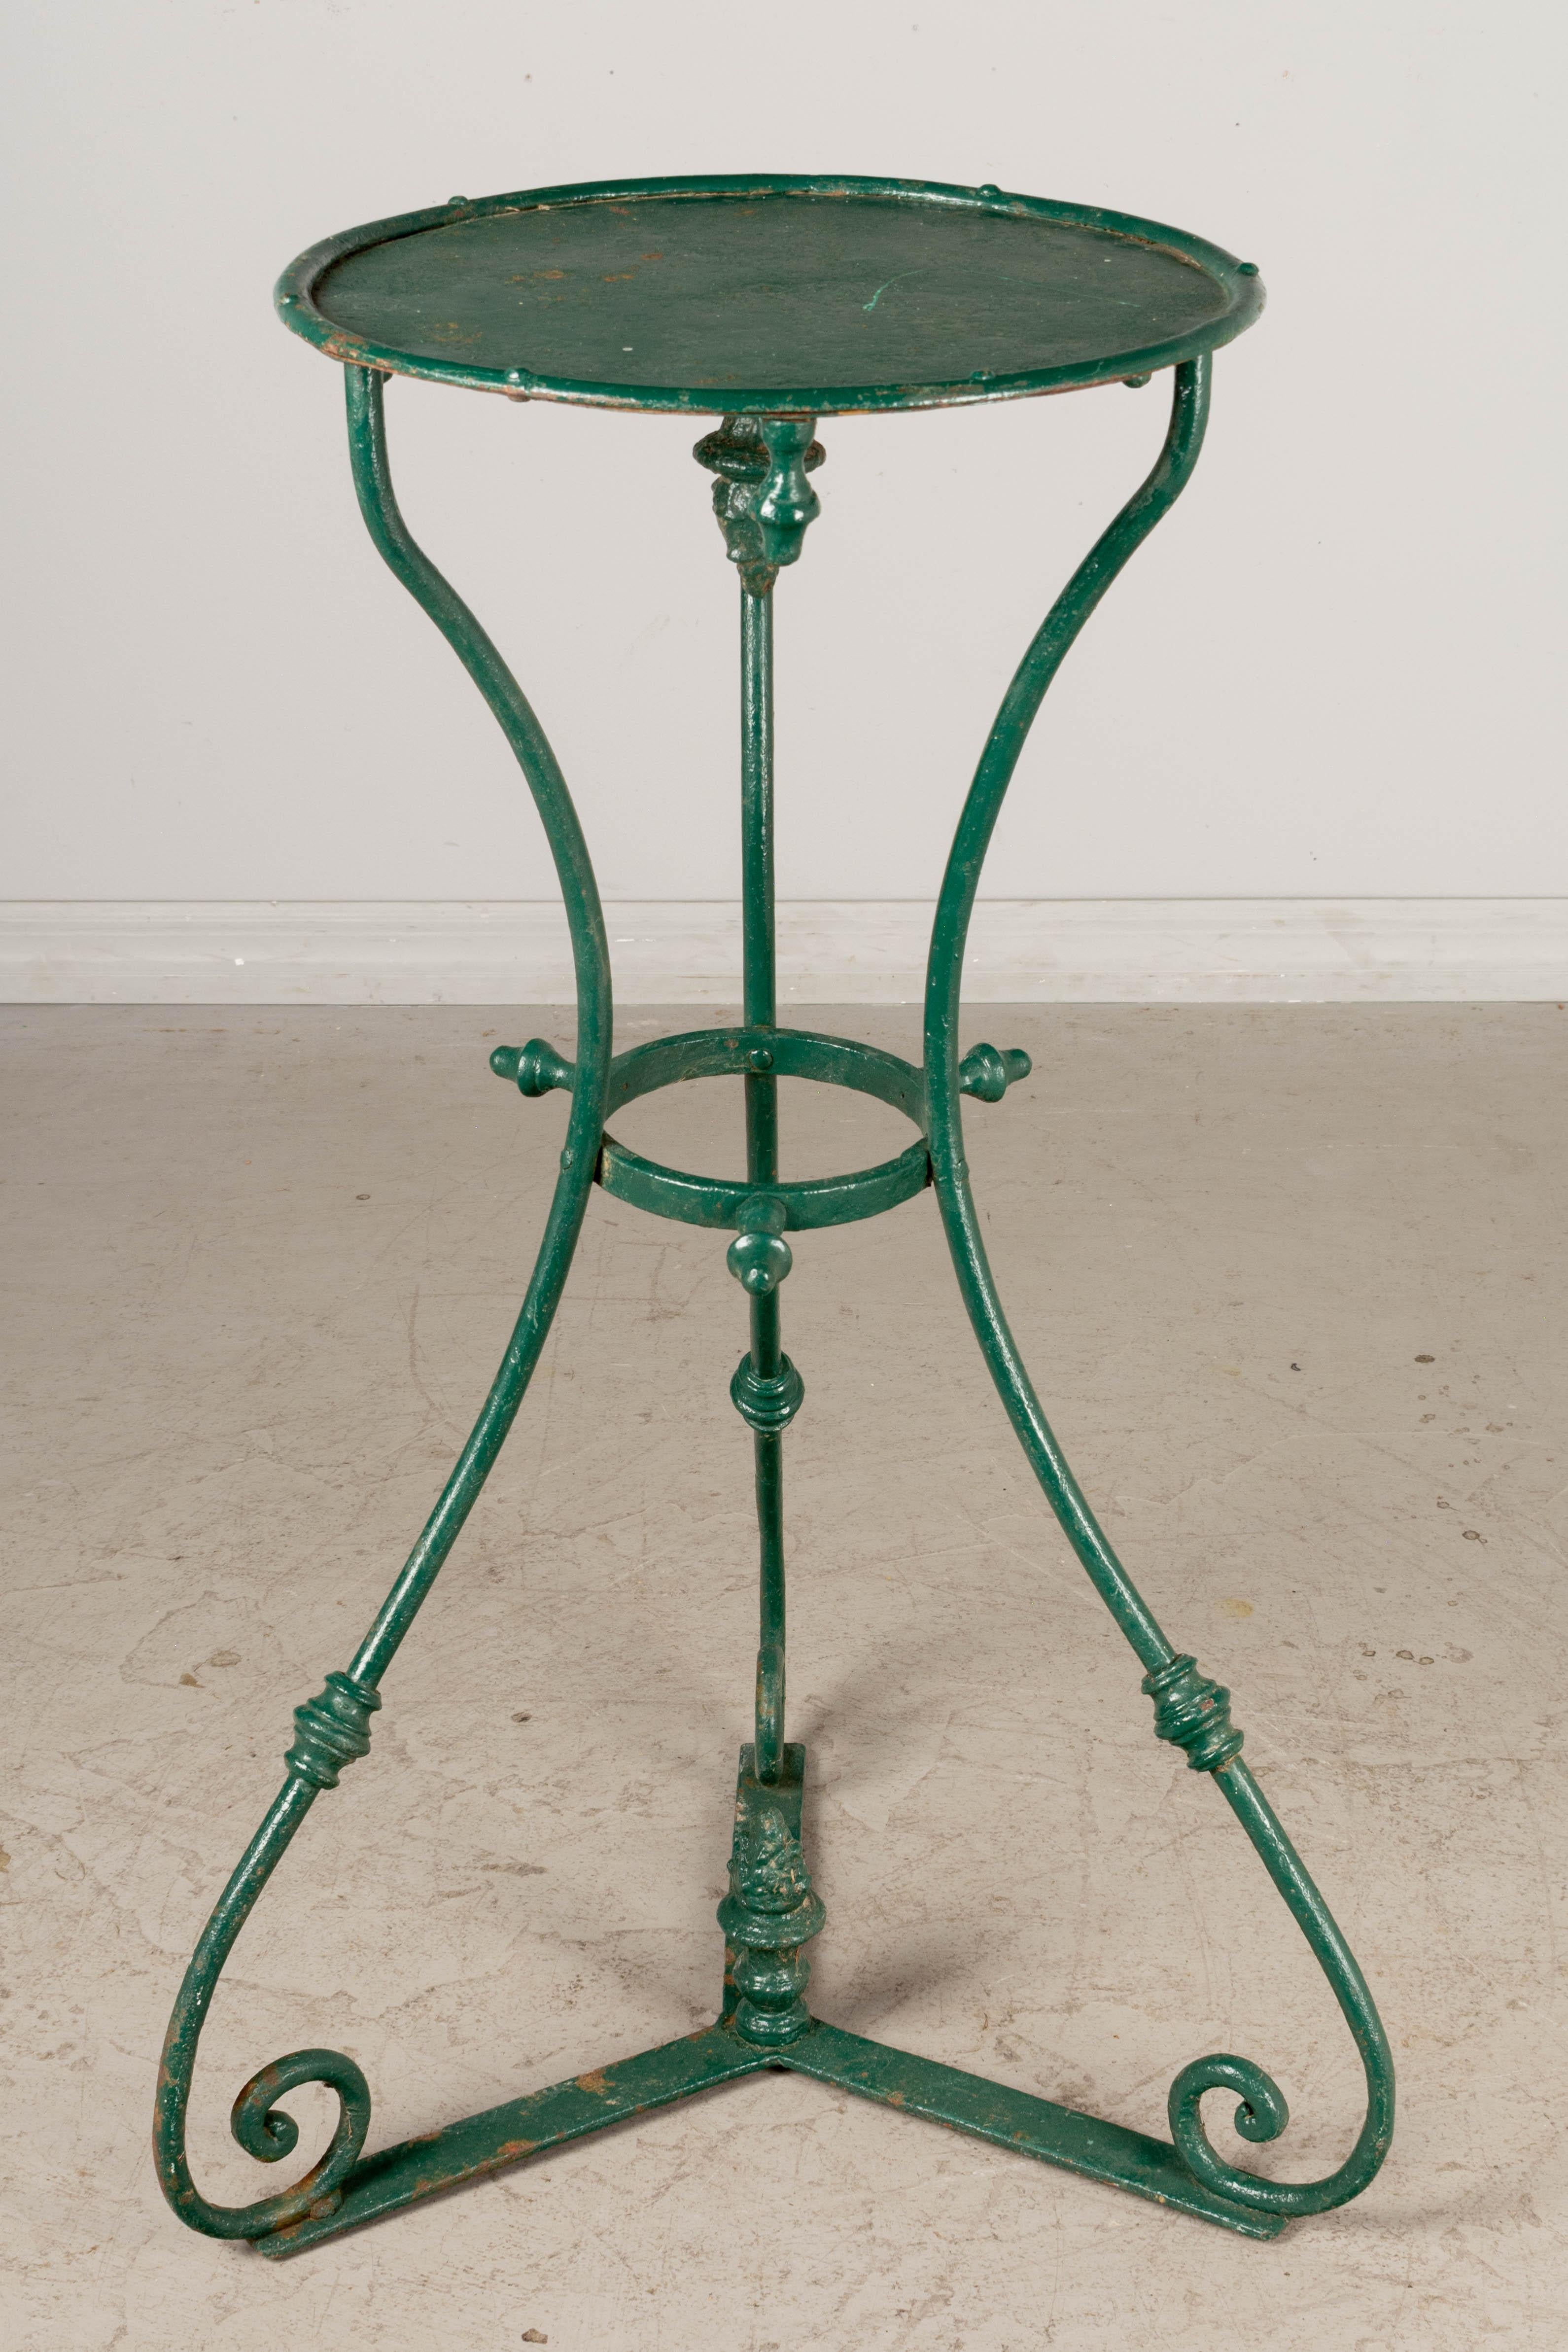 Beaux Arts 19th Century French Wrought Iron Garden Pedestal For Sale